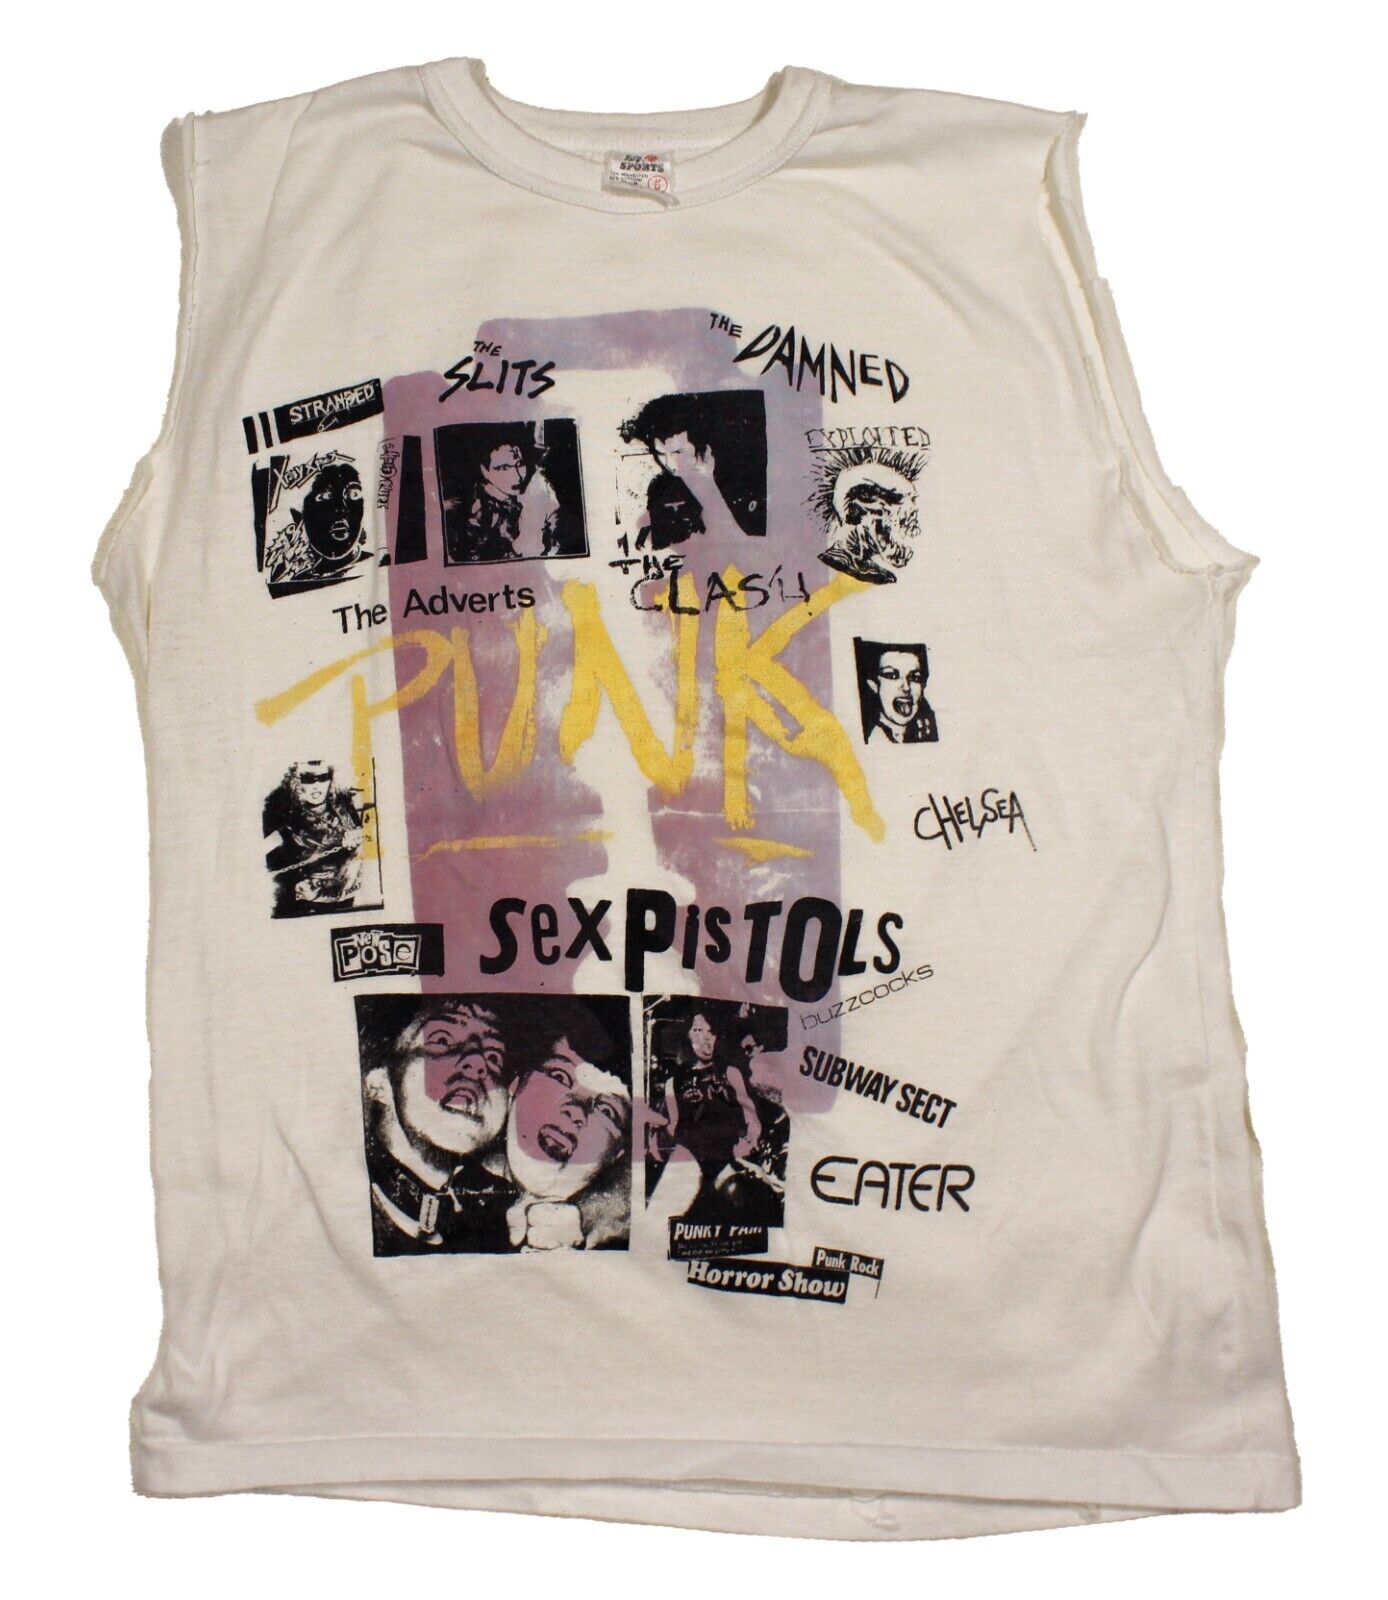 Punk Rock Collage Vintage T-Shirt – Various Early Punk Bands on Vintage T-shirt